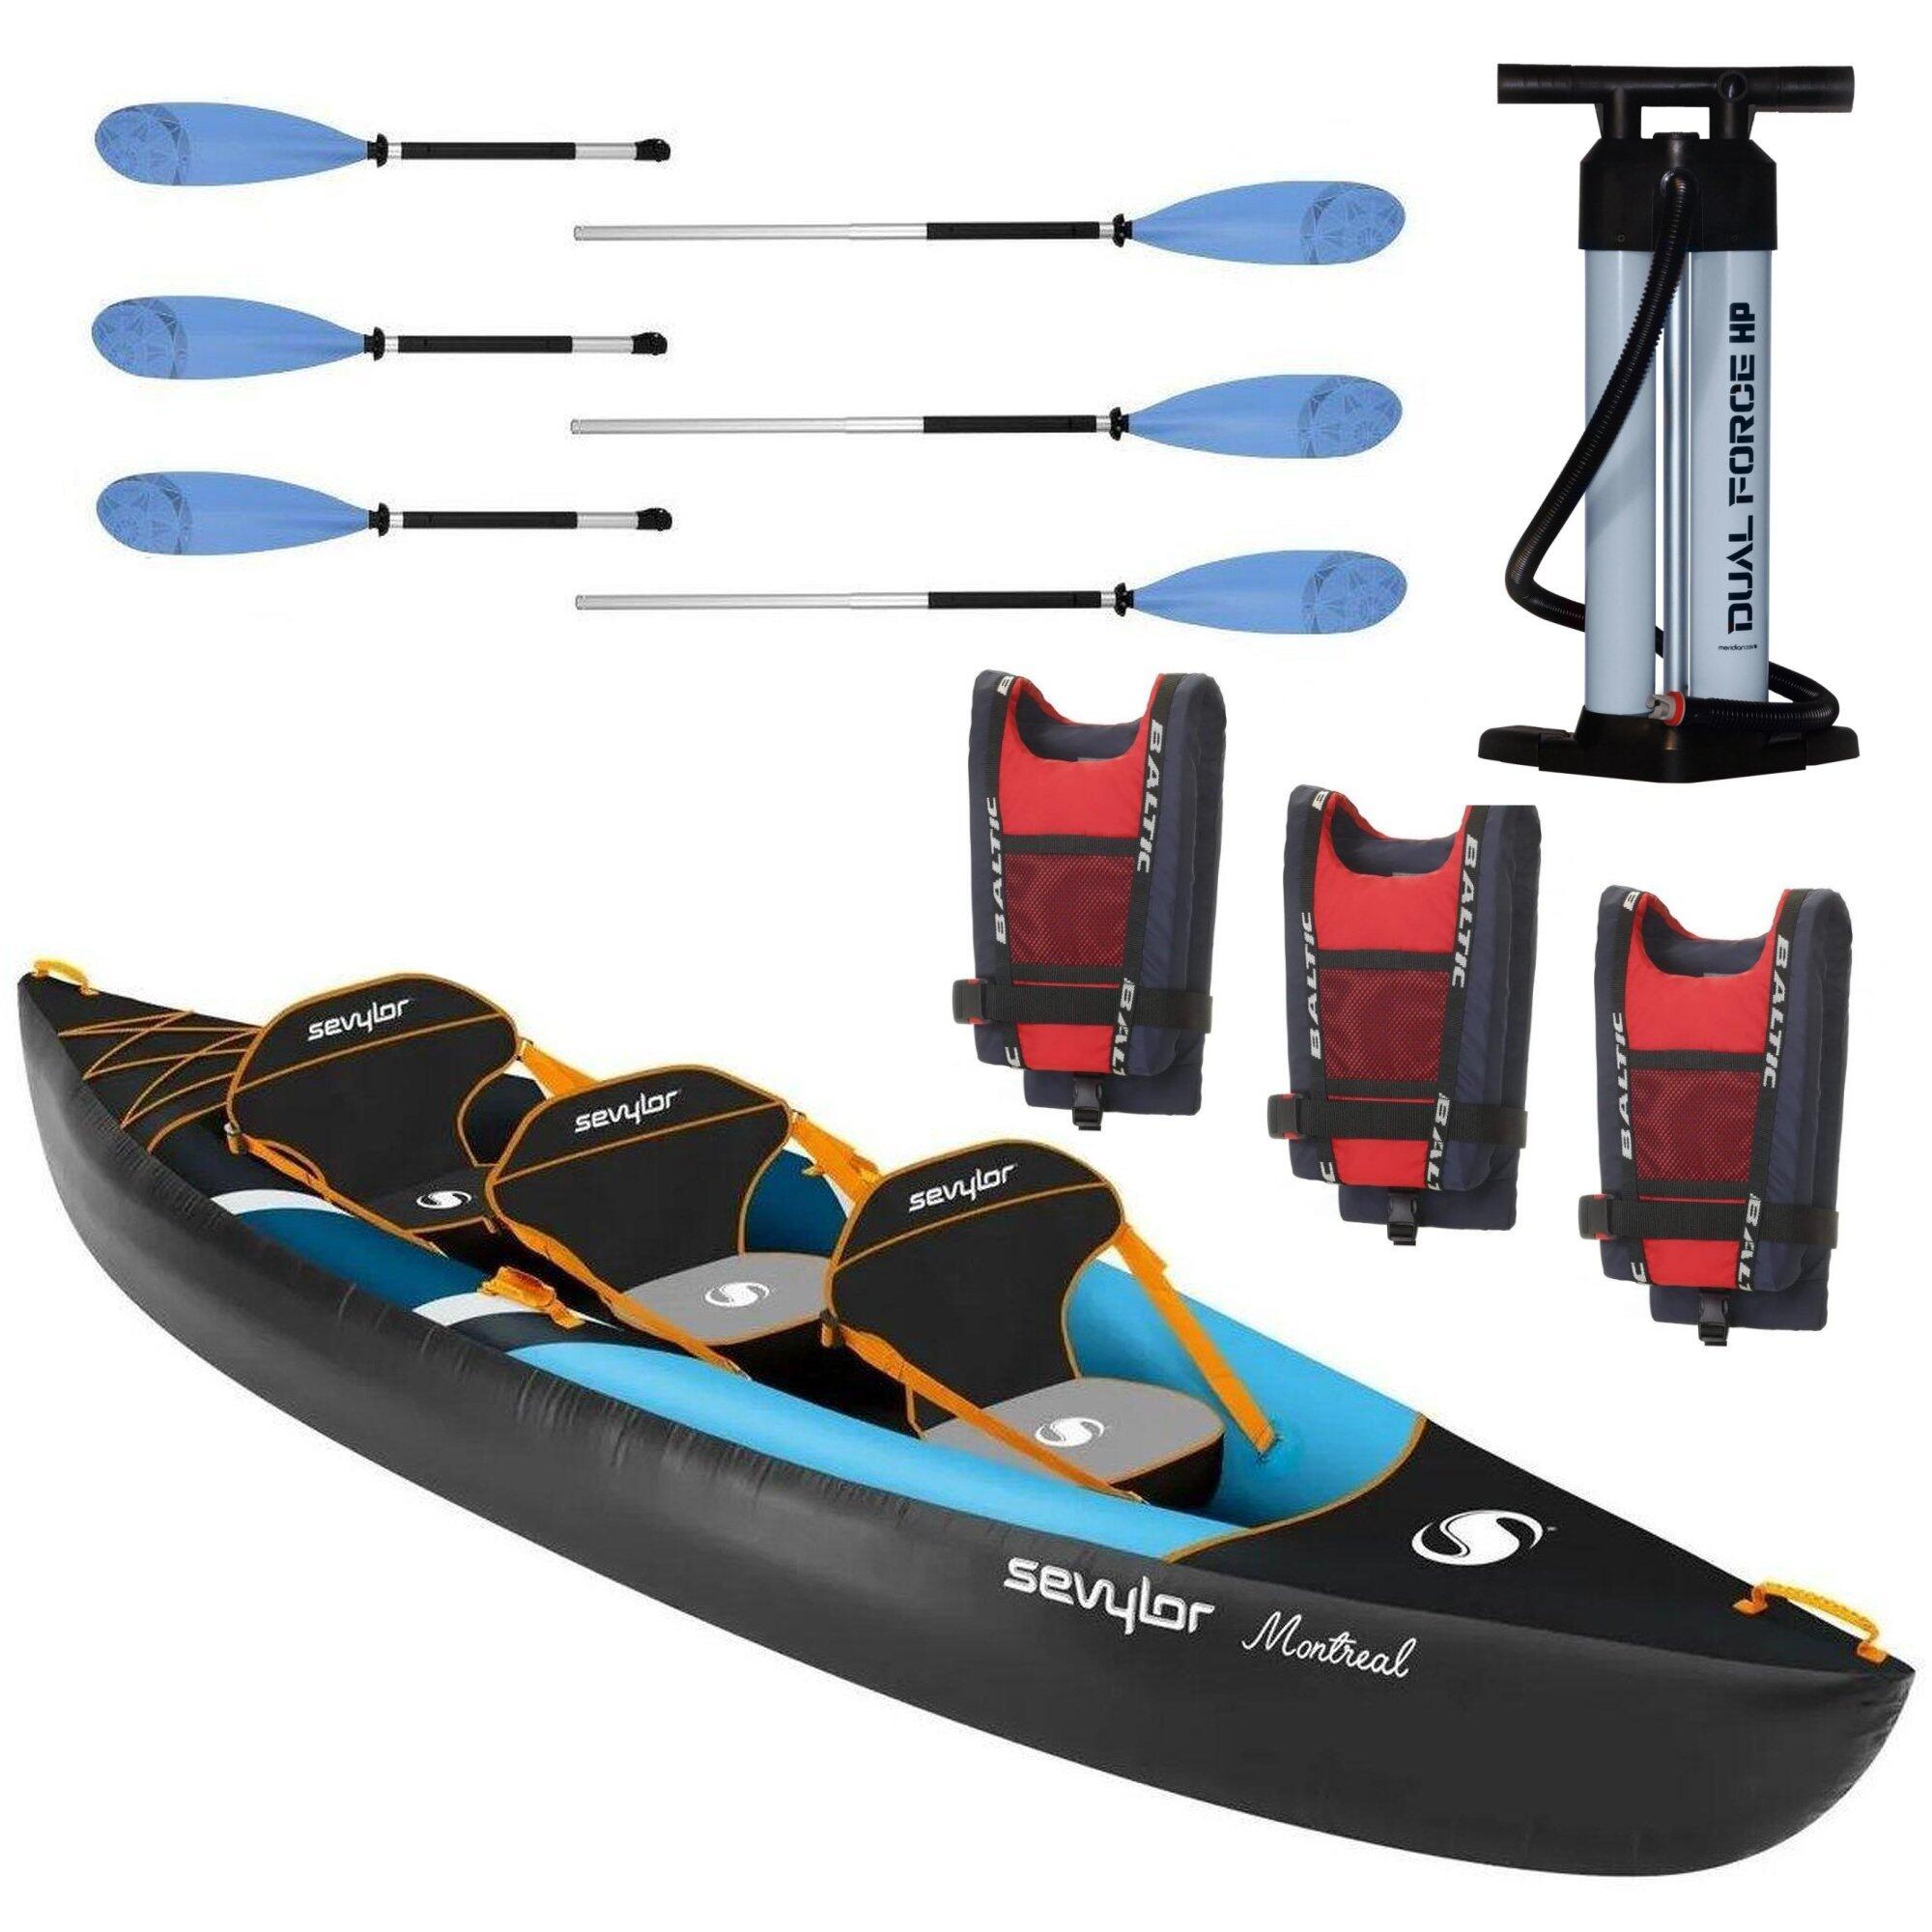 Montreal 3 Person inflatable Kayak kit with Buoyancy Aids, Paddles & HP Pump 1/5